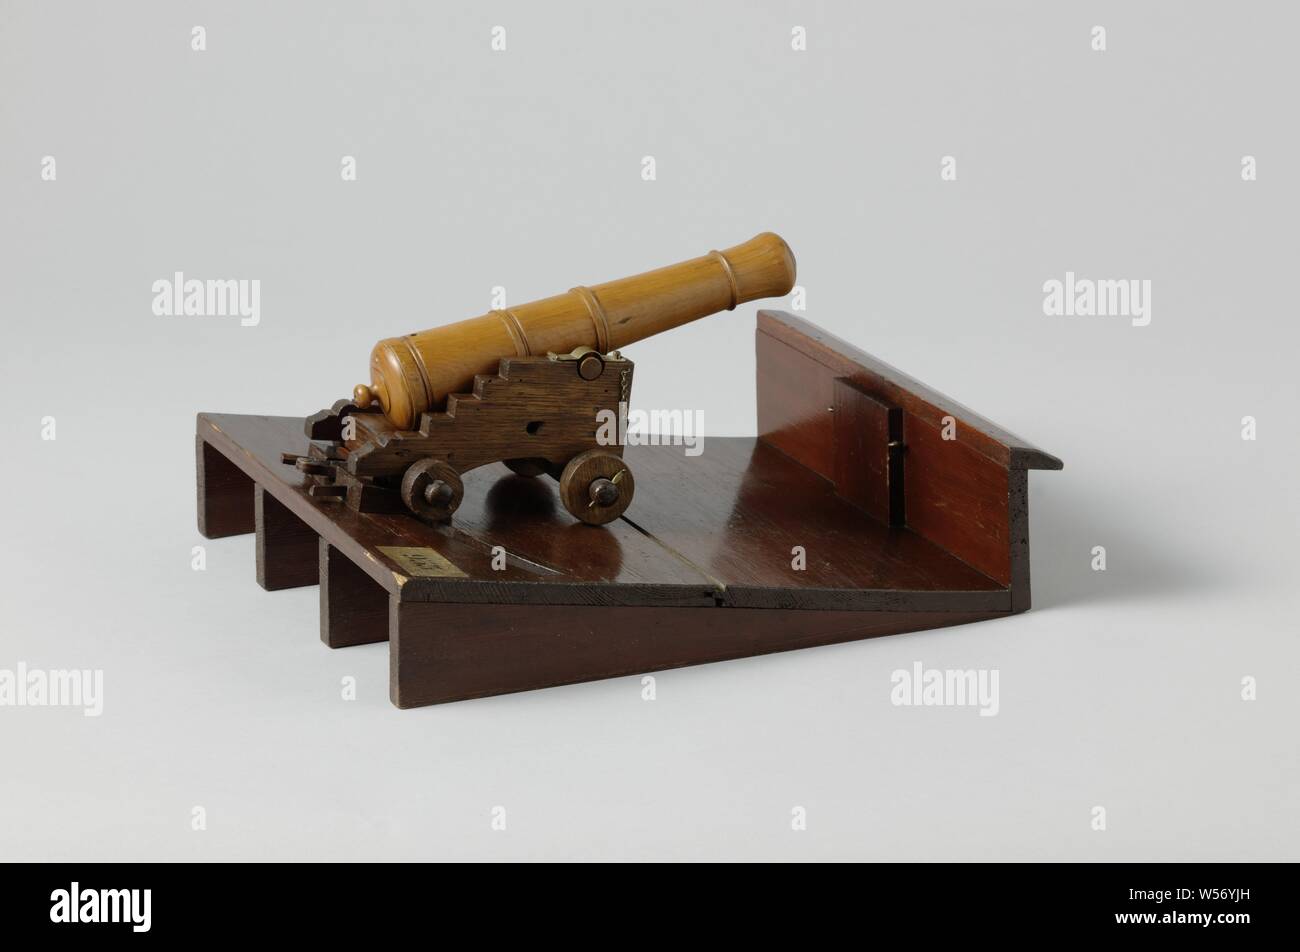 Model of a Gun and Carriage on a Ship Deck, Model of a gun on a horse on a sloping deck with board on the low side. The wooden barrel is 26 cm long. The rolling horse, narrower at the rear, consists of two cheeks with four steps and an arched cut-out at the bottom, which are connected by the calf, a breast piece, a crossbar in the middle, the soleplate and a bar under the soleplate, and the ashes. The adjusting wedge is missing. The wheels are made of wood and the front wheels are larger than the rear wheels. There is a mechanism in the deck above which hooks under the rear axle body of Stock Photo